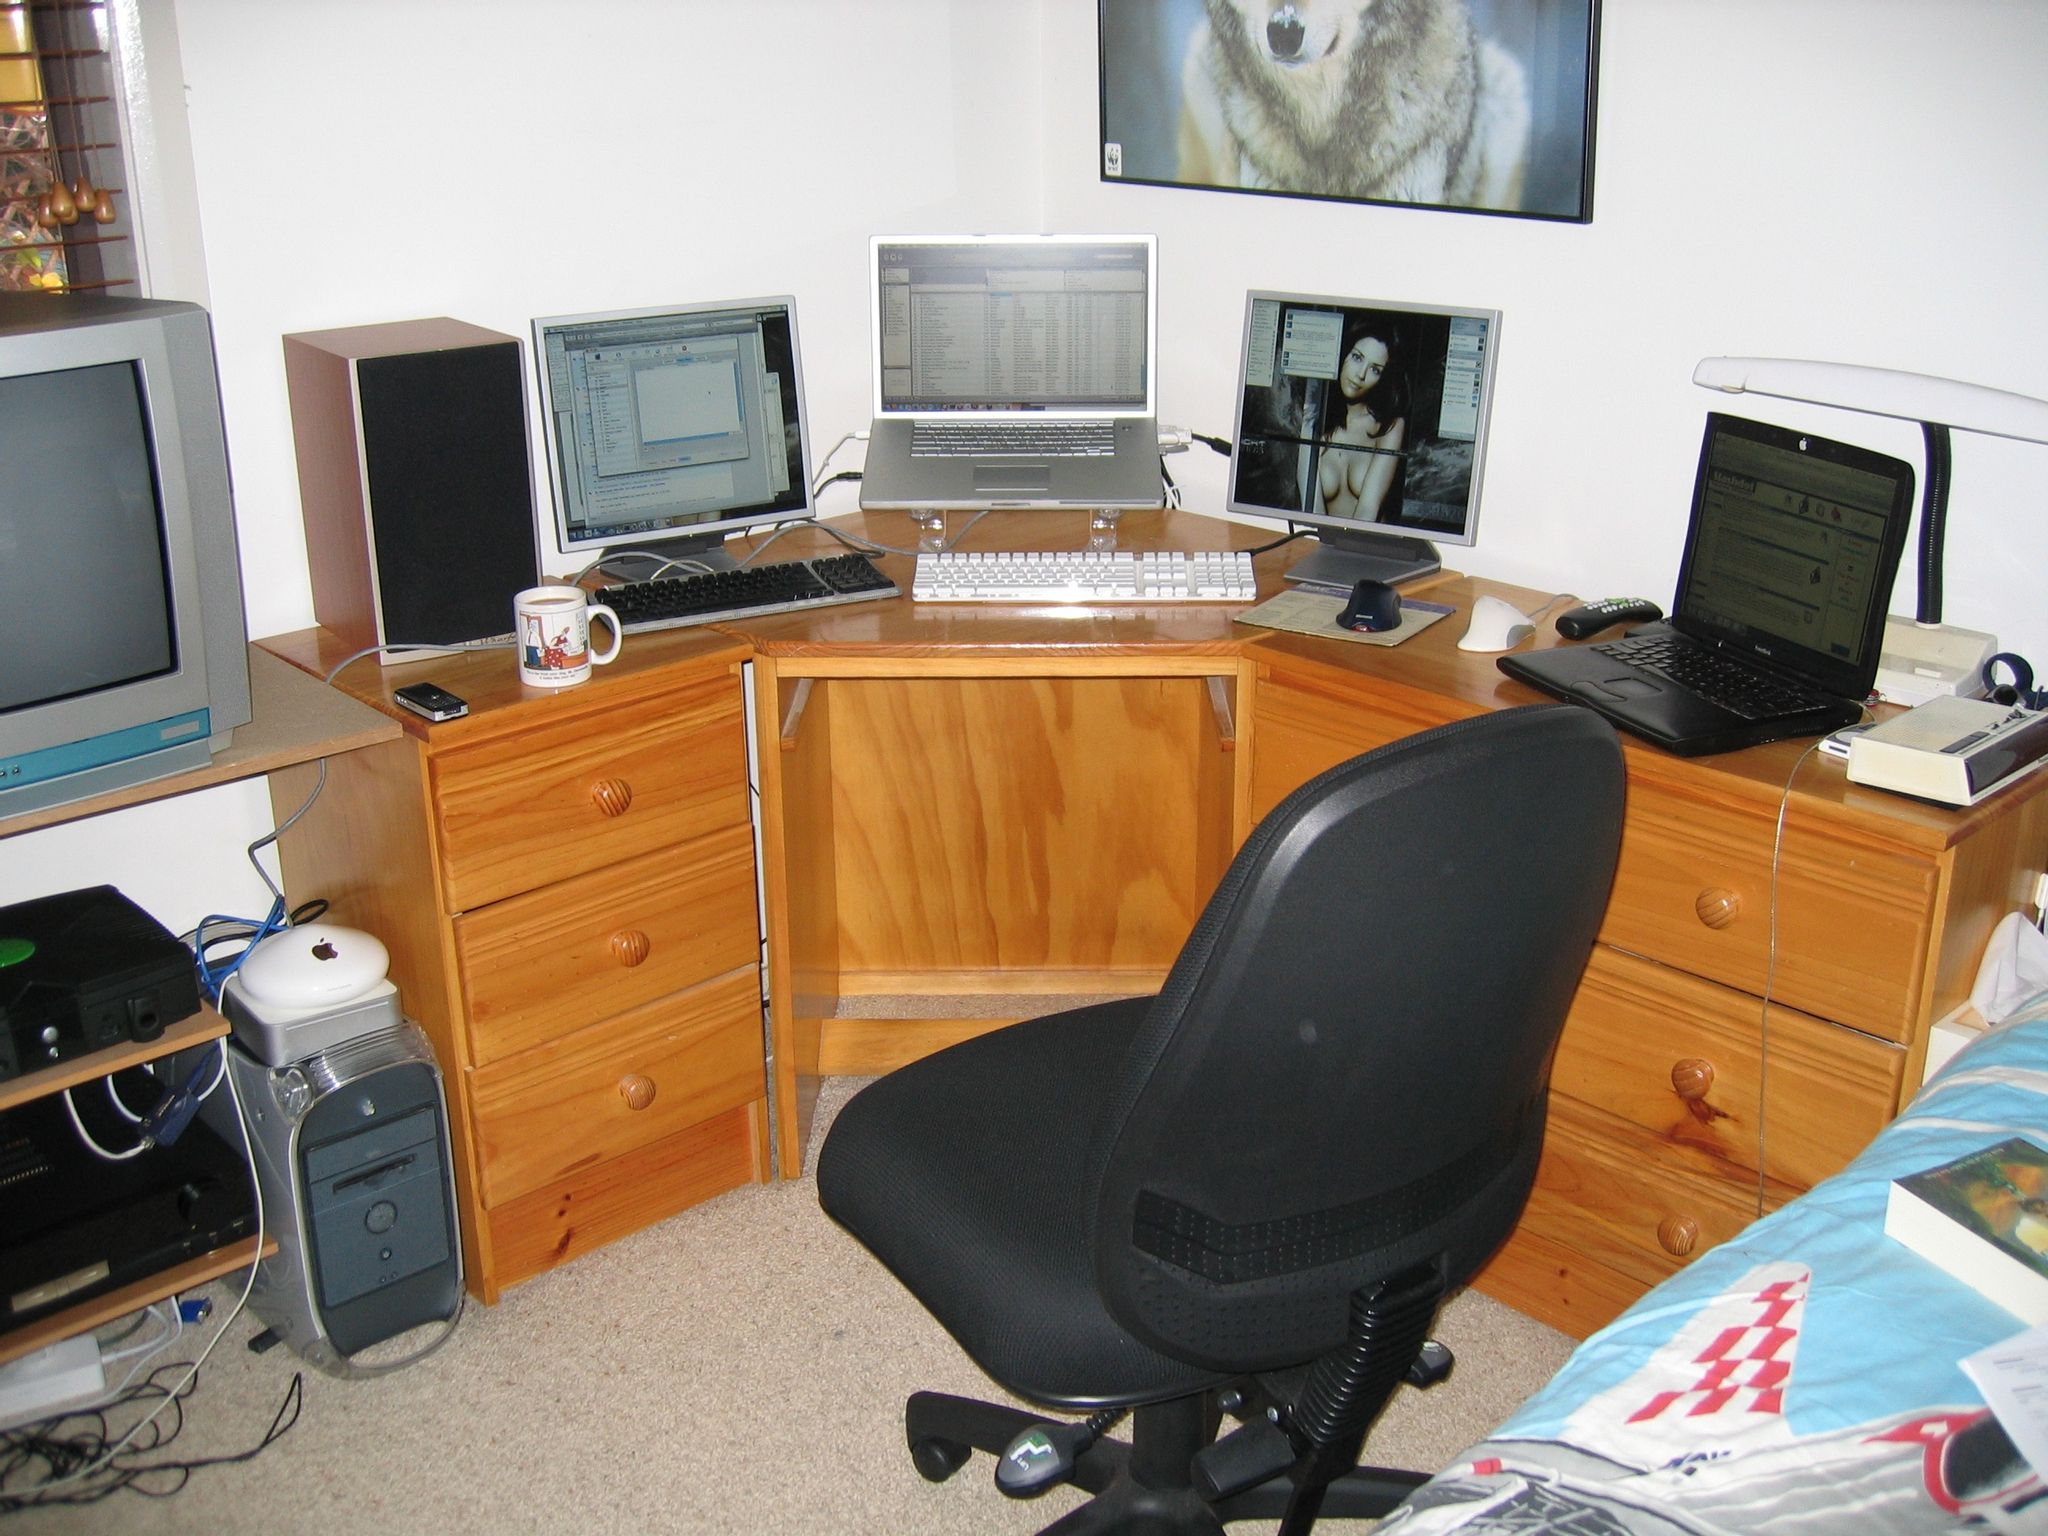 A photo of my bedroom computer setup. There's a corner desk with a 17" PowerBook on a laptop stand in the middle, flanked by 2 17" 4:3 monitors. A black Pismo-model PowerBook G3 is open to the right. On the floor to the left of the desk is a graphite Power Mac G4, with a G4 Mac mini sitting on top of it, and on top of THAT is a dome-shaped AirPort Extreme wireless router.